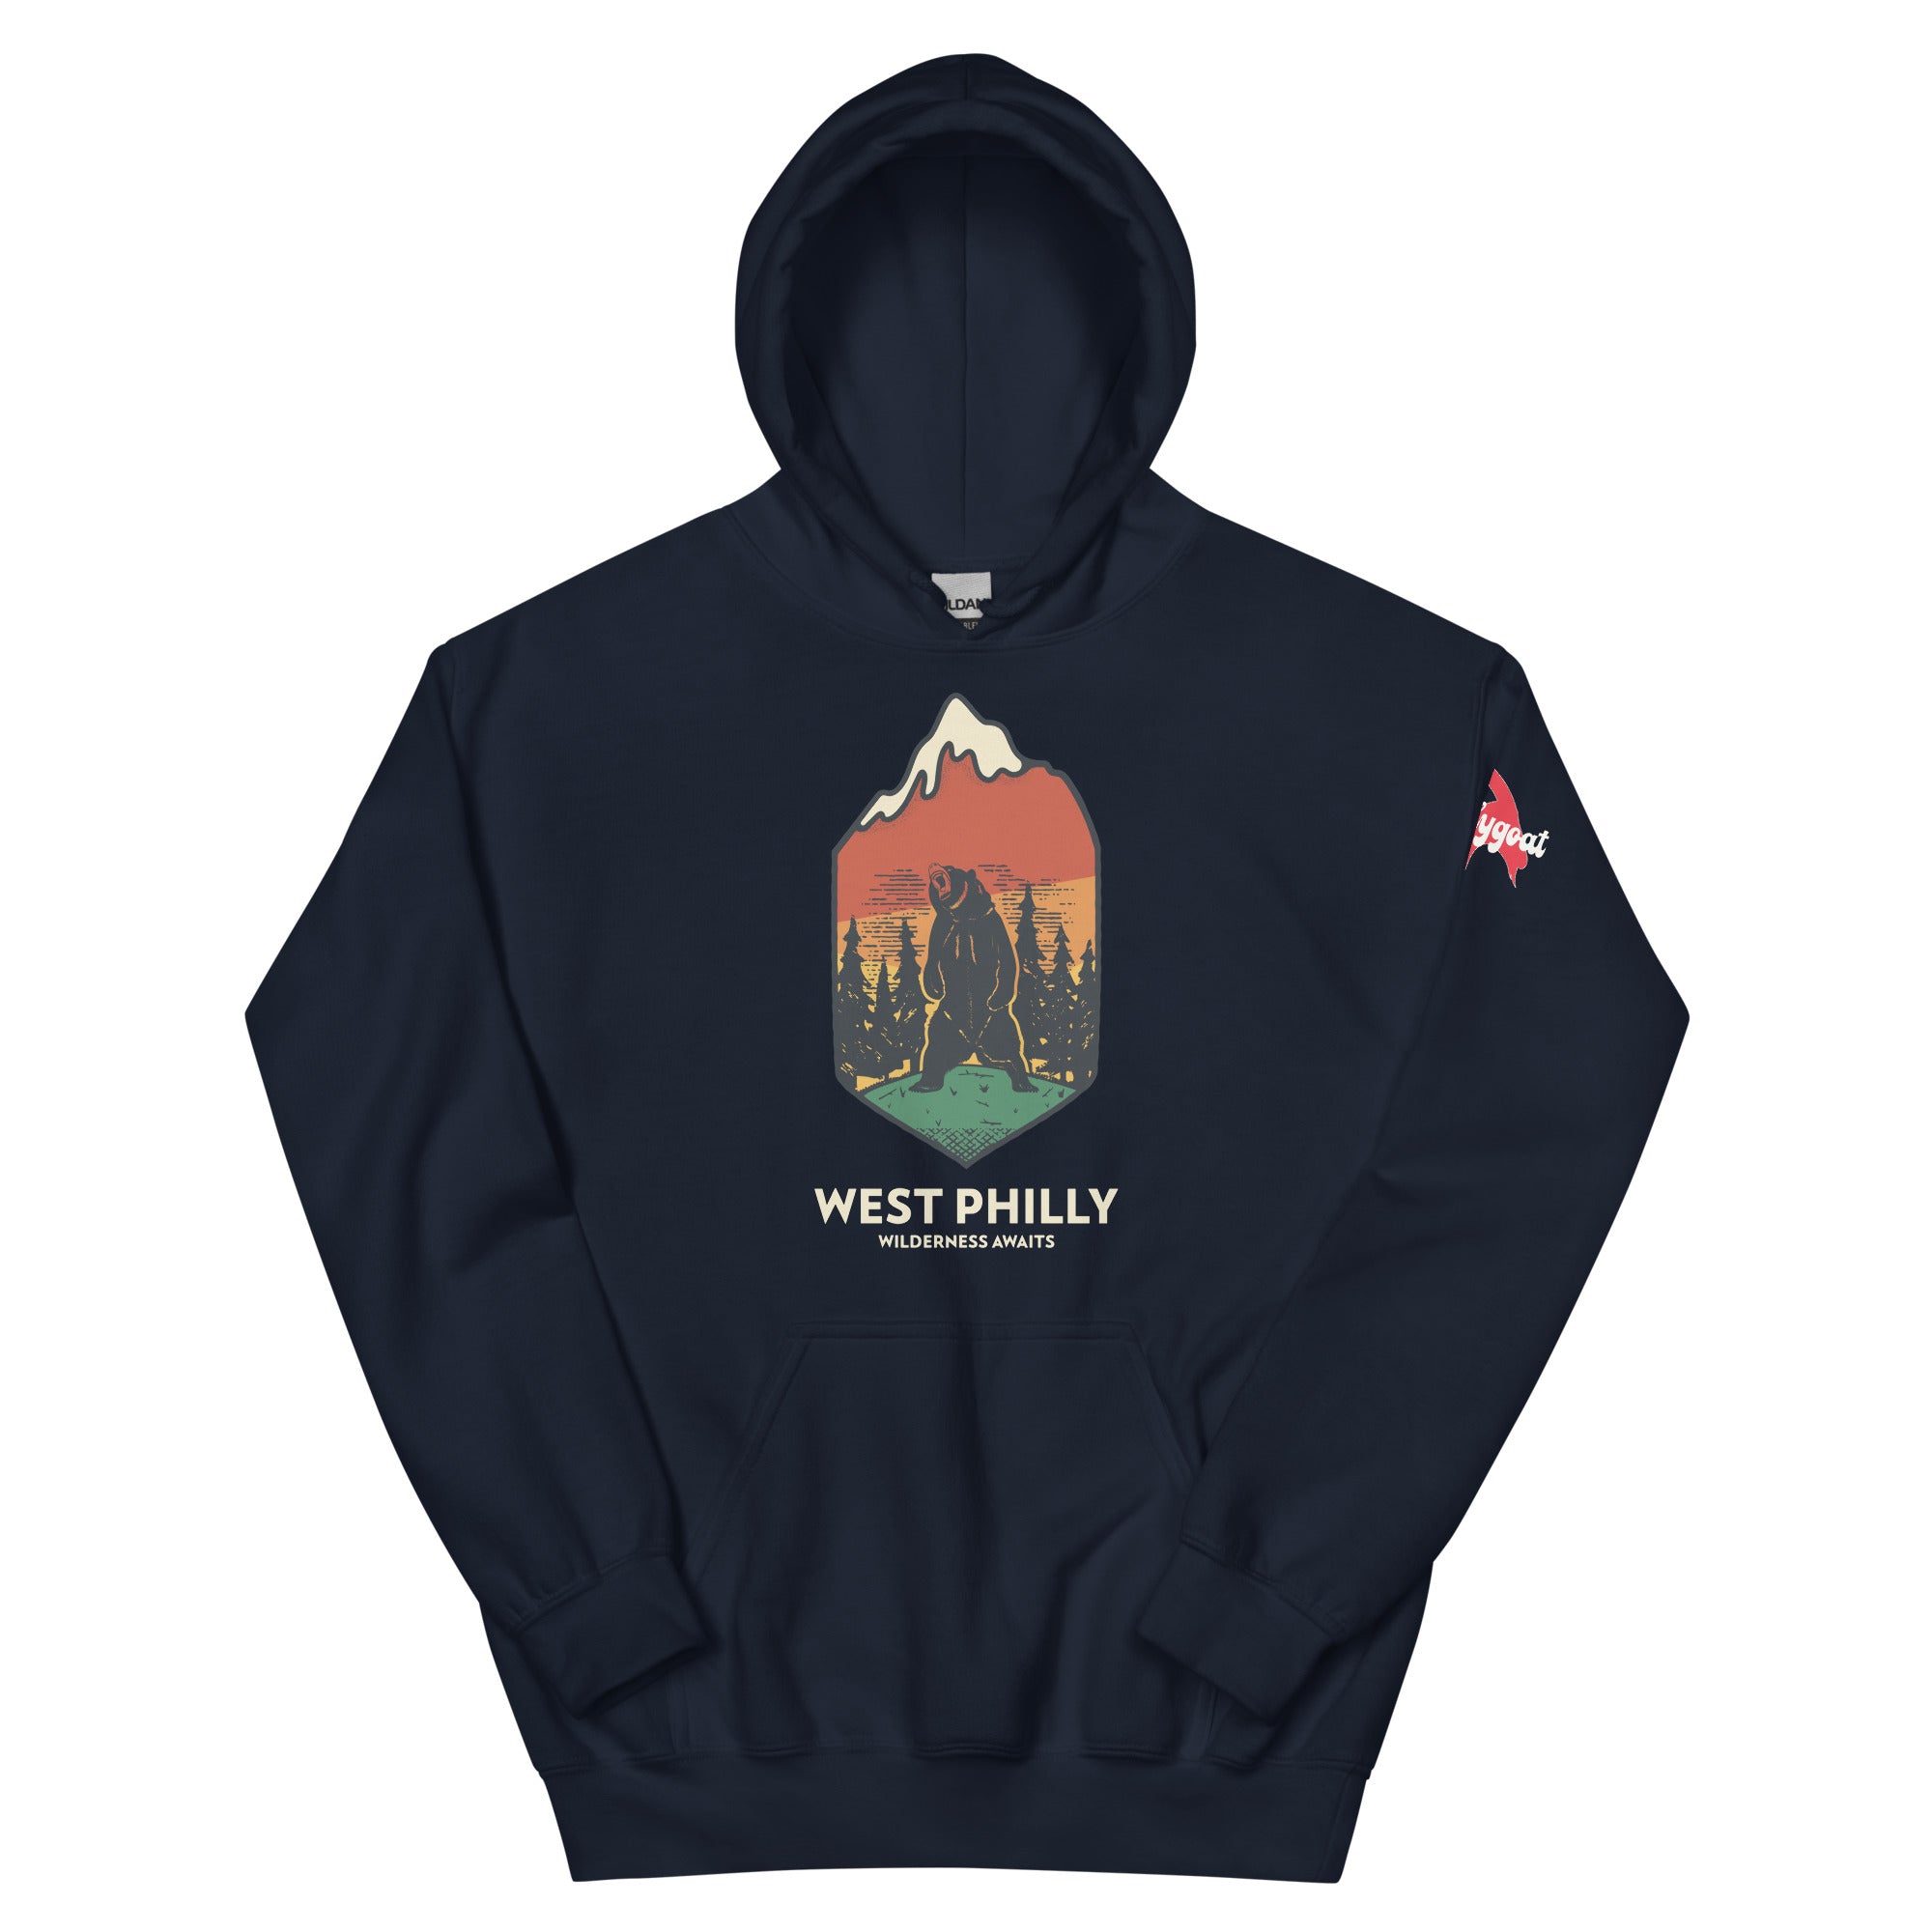 West Philly Philadelphia outdoors wilderness navy blue hoodie Phillygoat